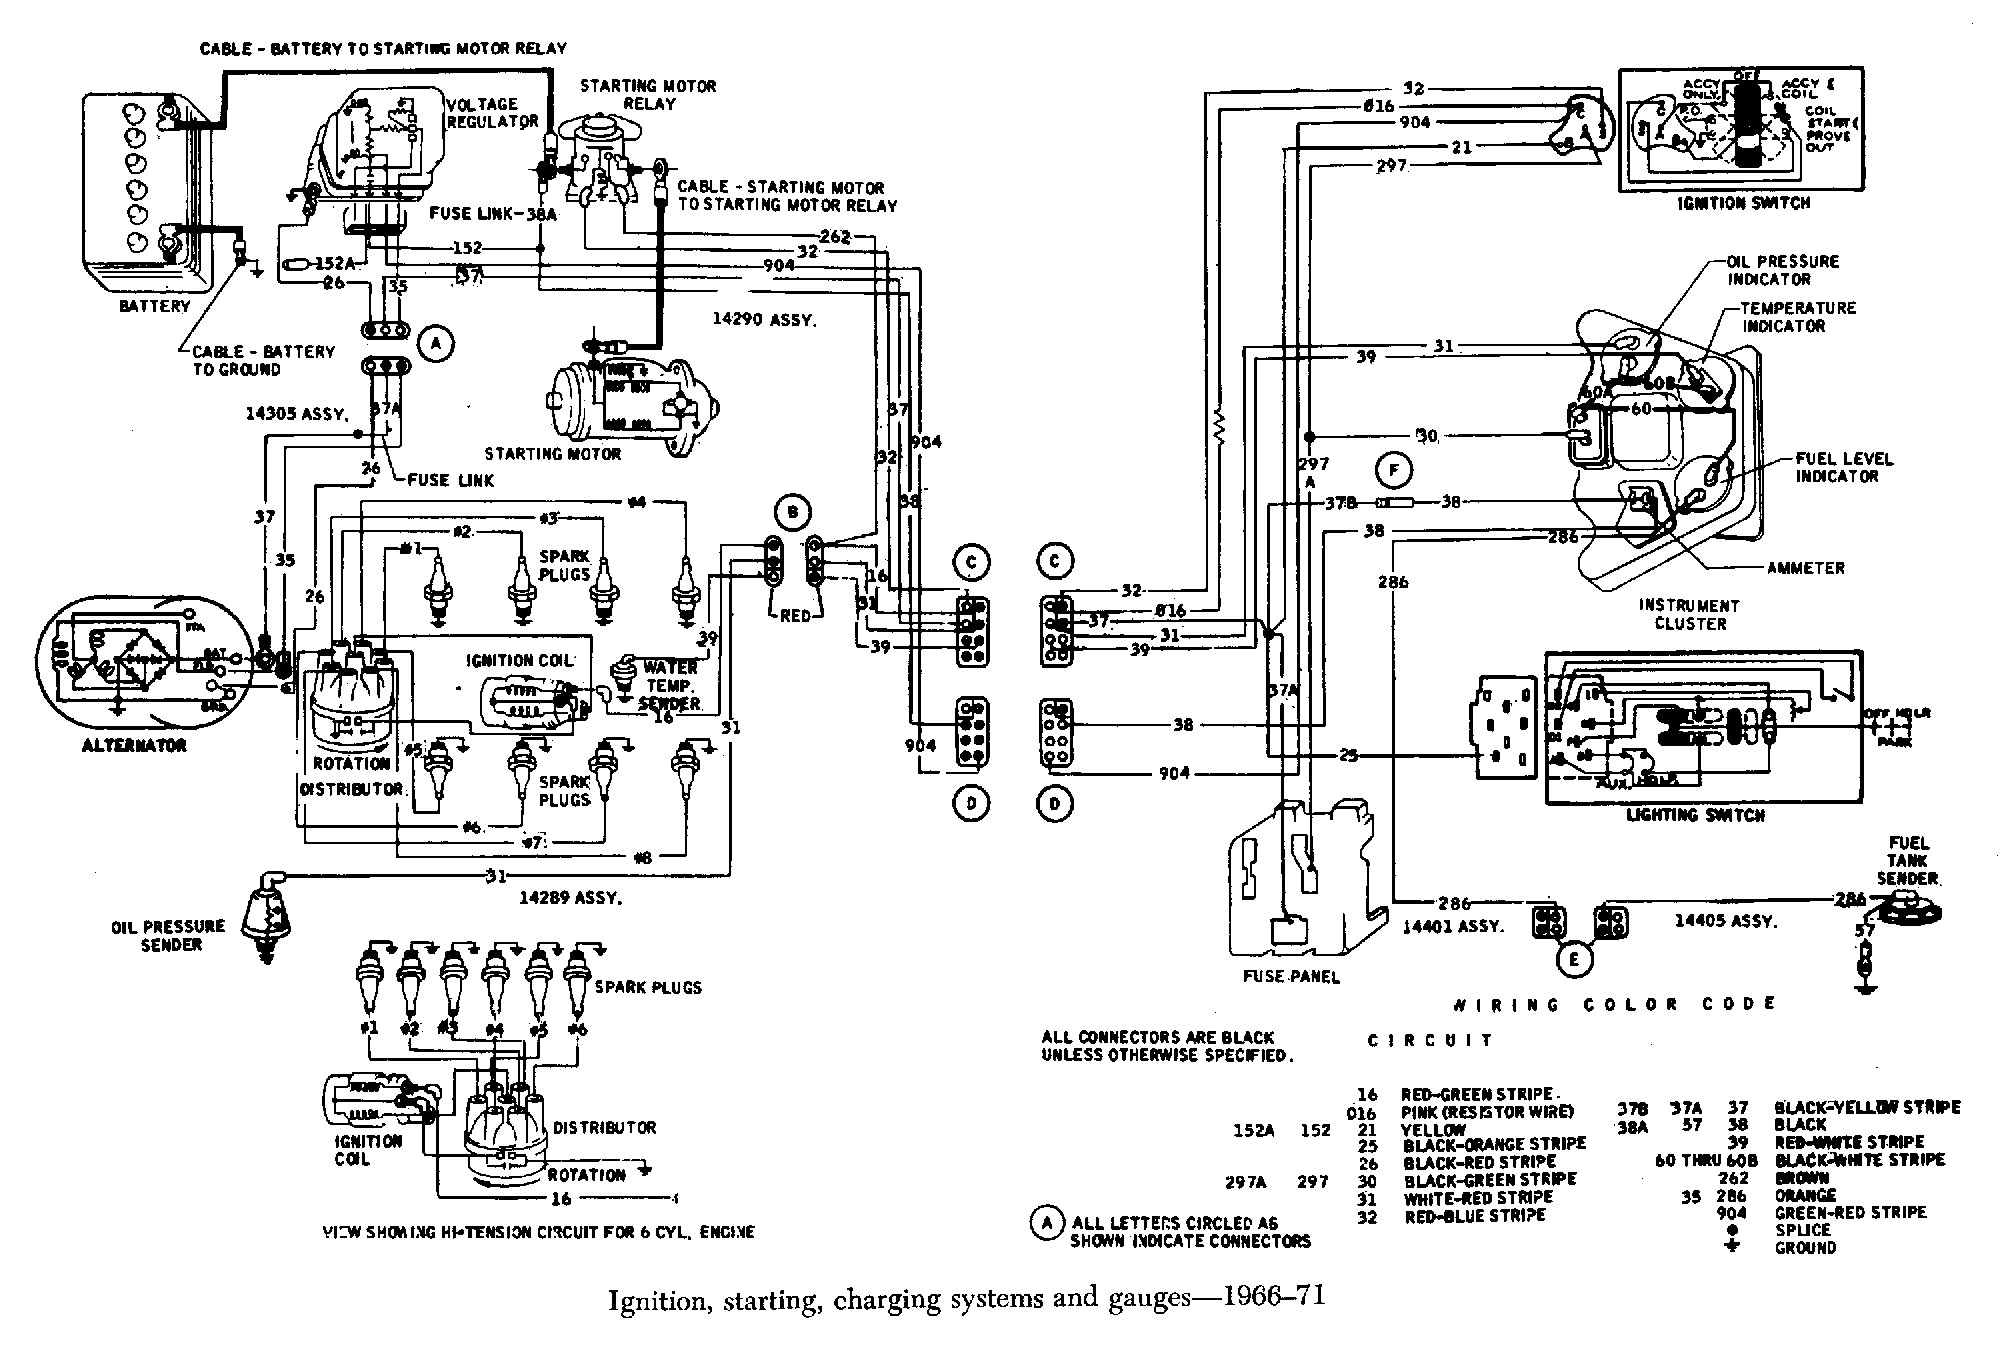 Chevy 350 Engine Diagram I Need A Wiring Diagram for A 350 Engine Ignition System Only the Starter Dist Key Batt Alt Of Chevy 350 Engine Diagram